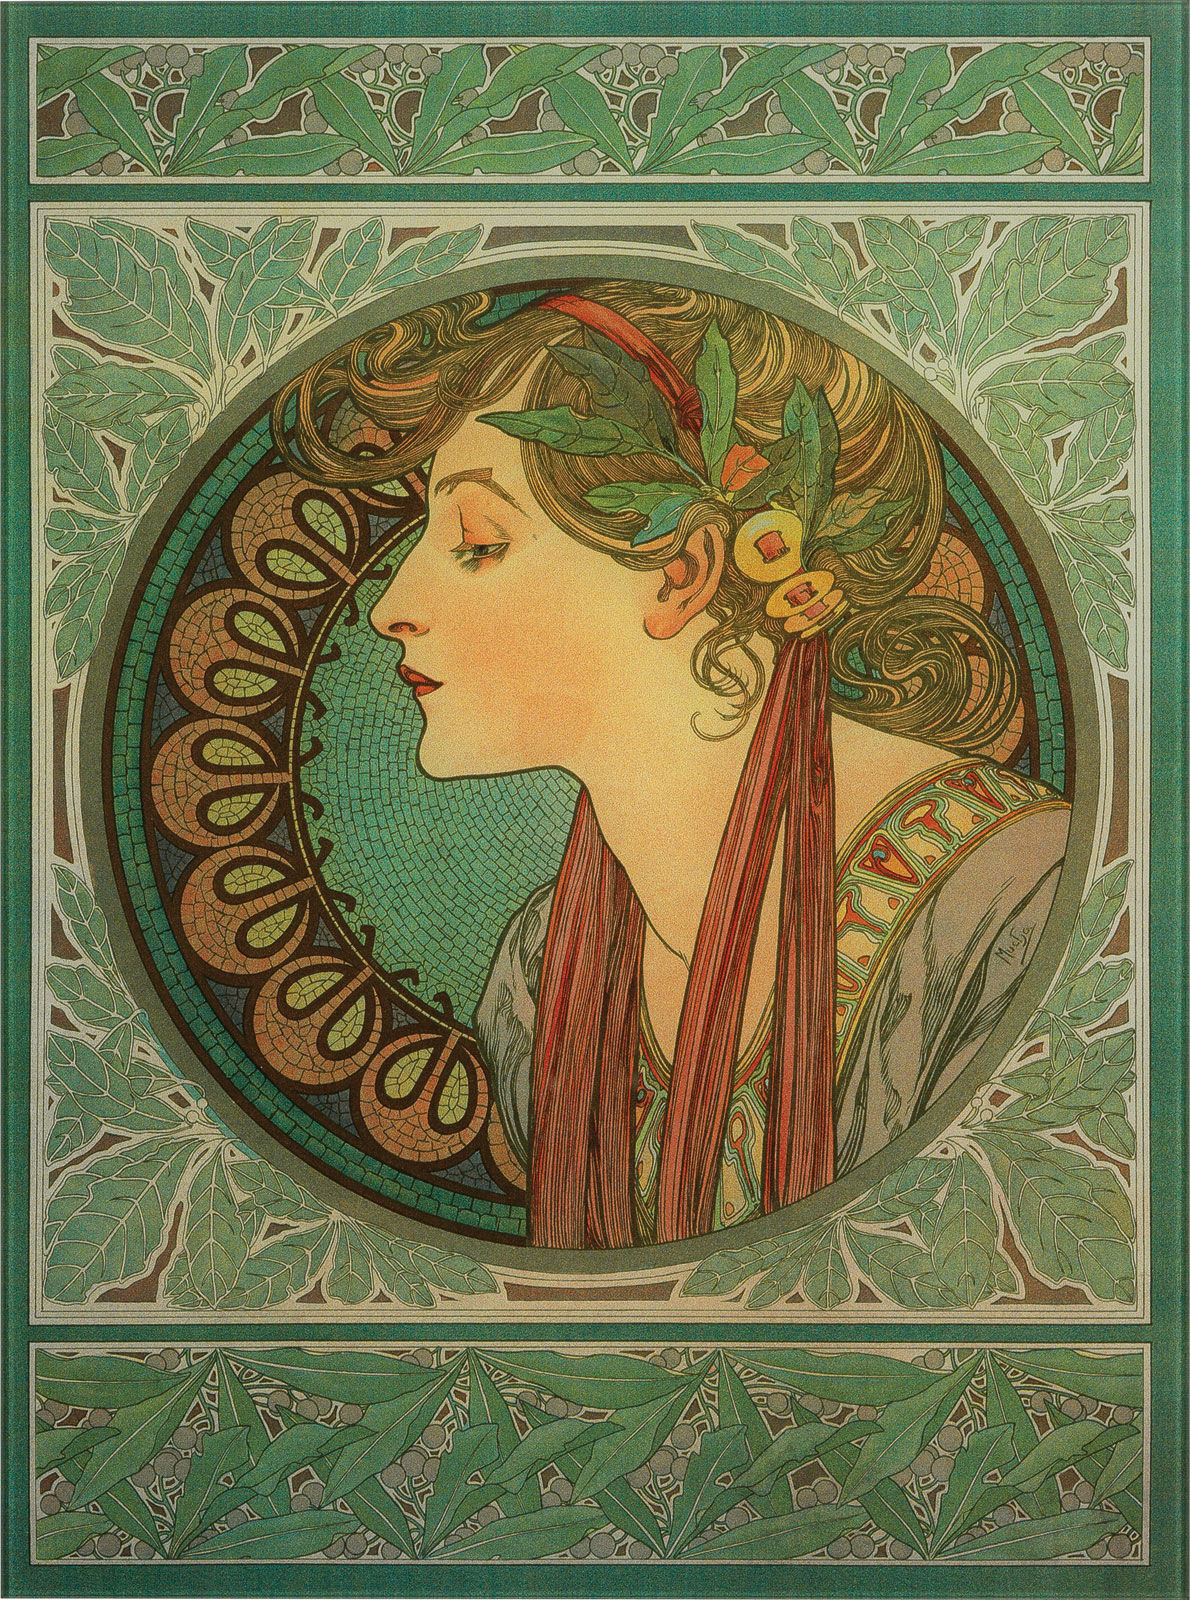 Glass picture "Laurel" (1901) by Alphonse Mucha